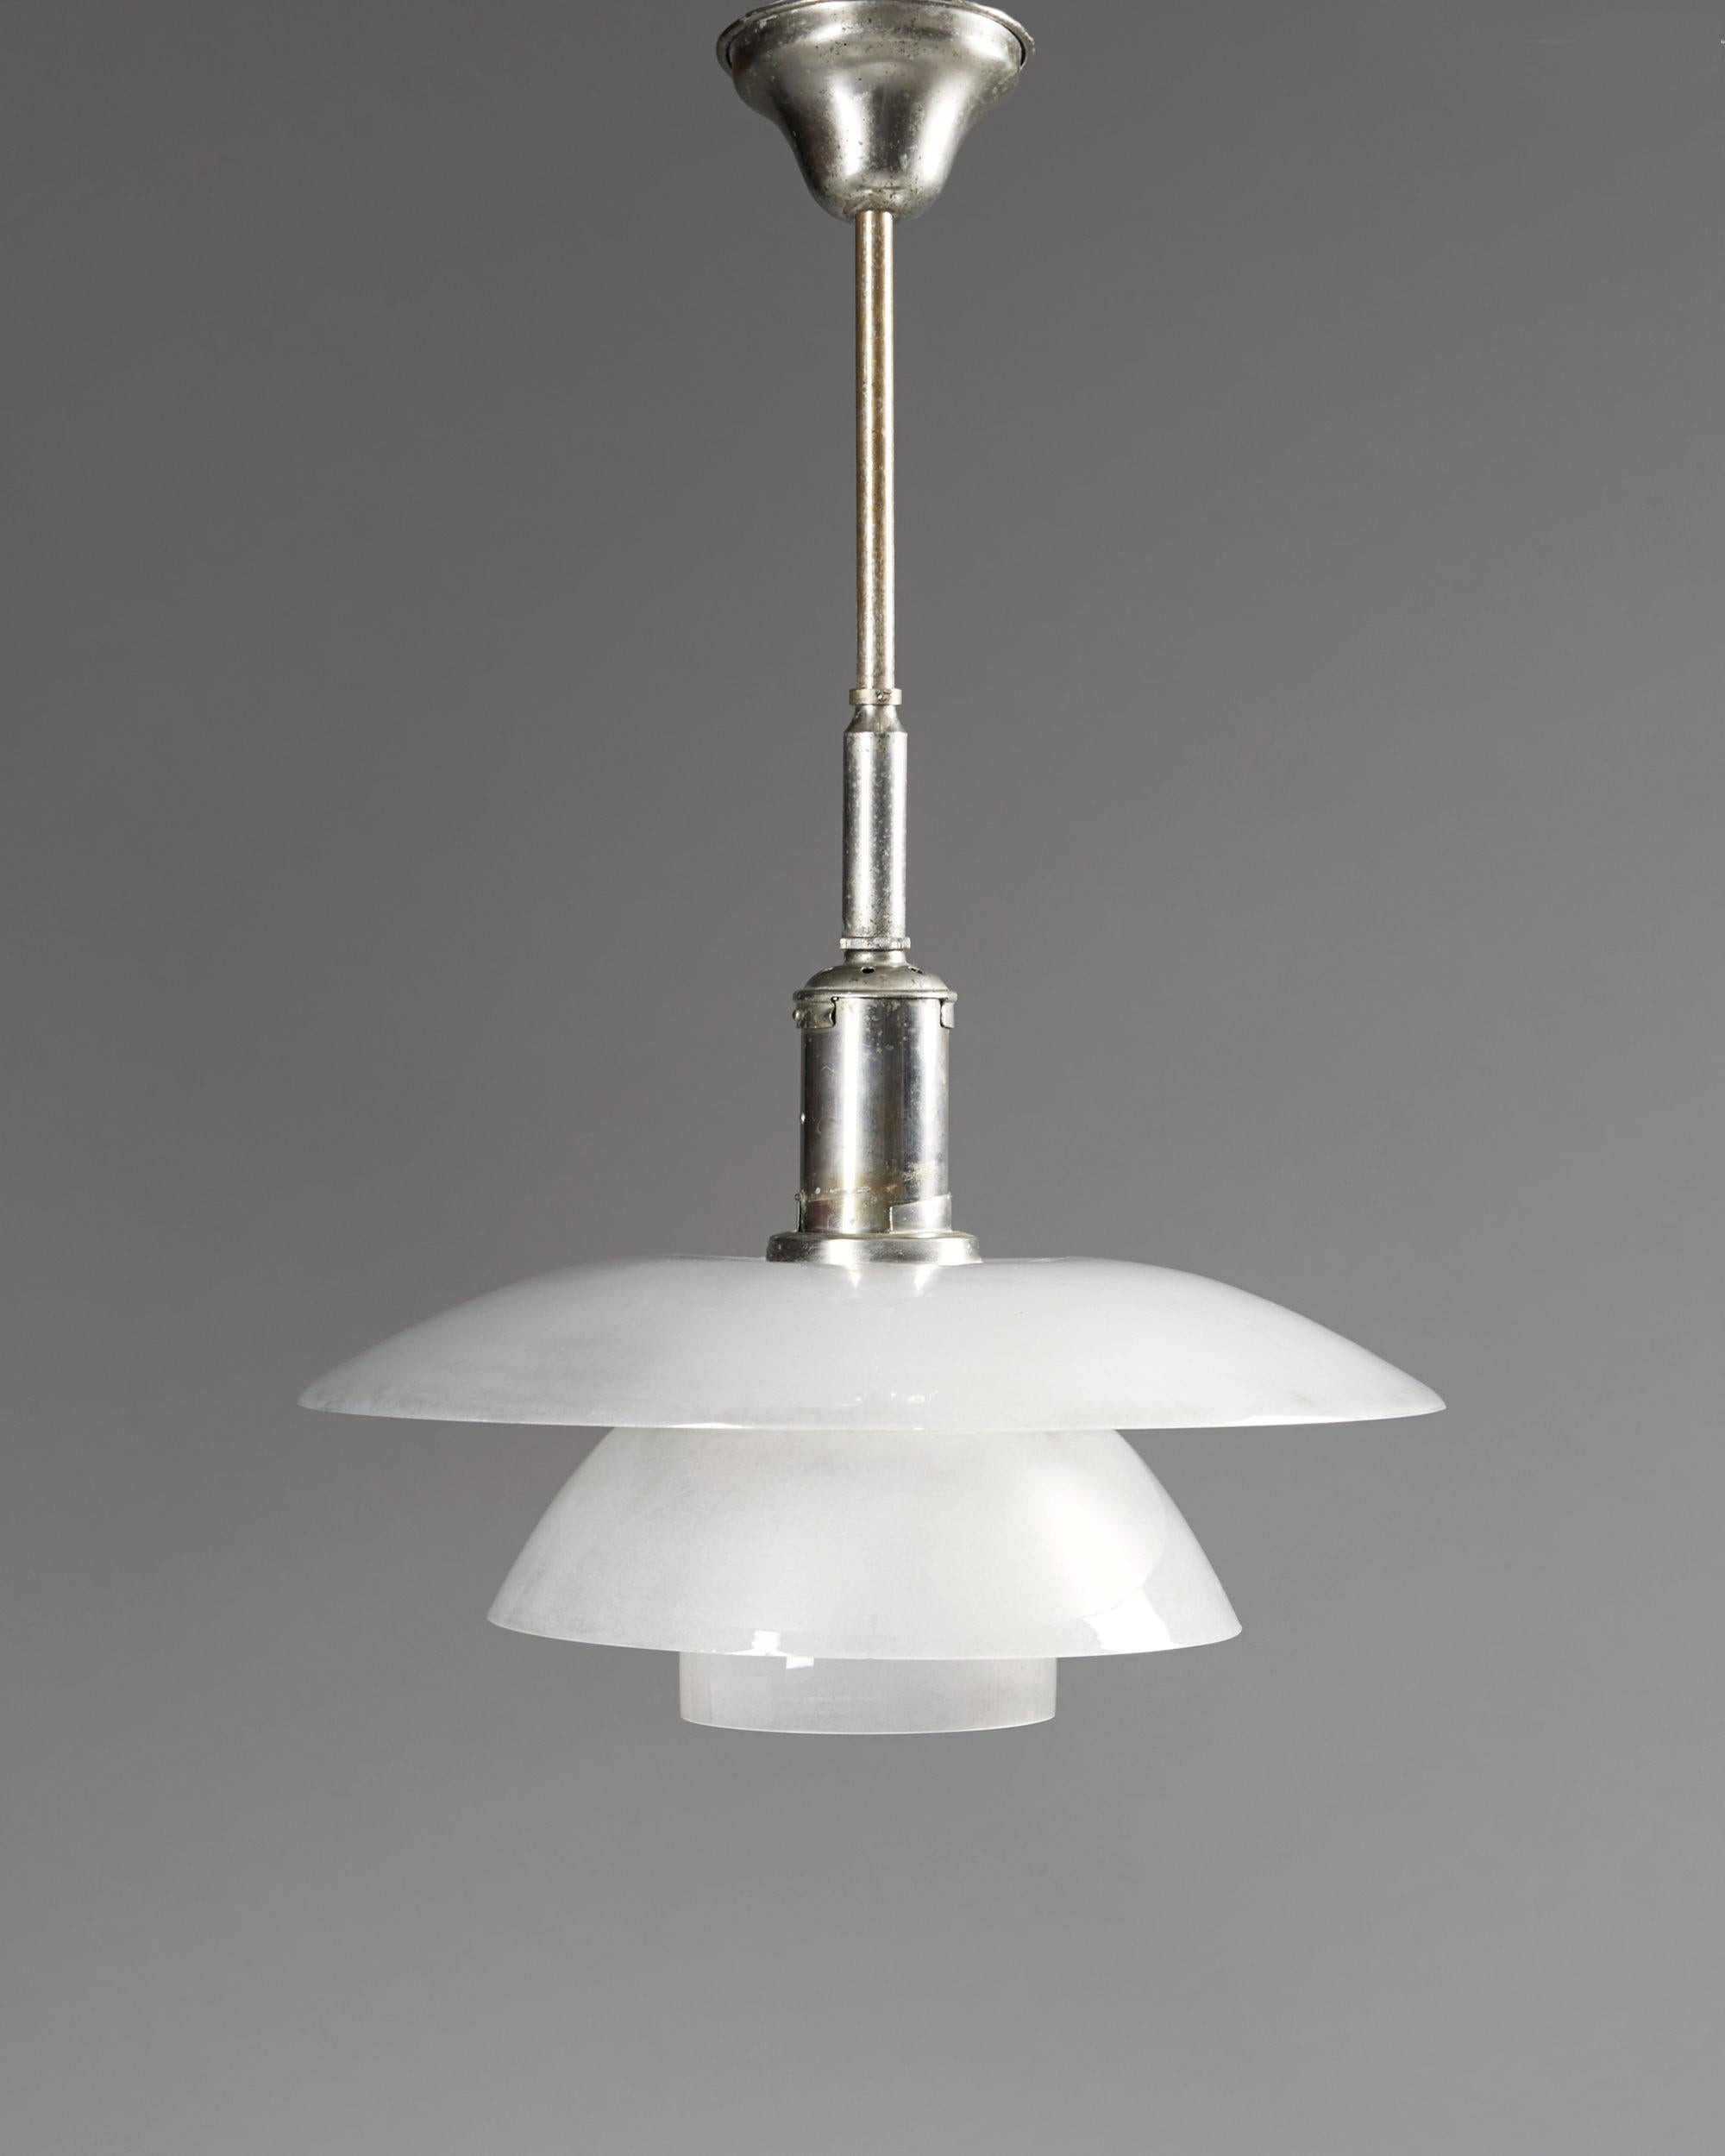 Ceiling lamp PH 4/4 designed by Poul Henningsen for Louis Poulsen,
Denmark. 1930's.

Nickel plated brass and original glass.

Measurements:
D: 40 cm/ 15 3/4''